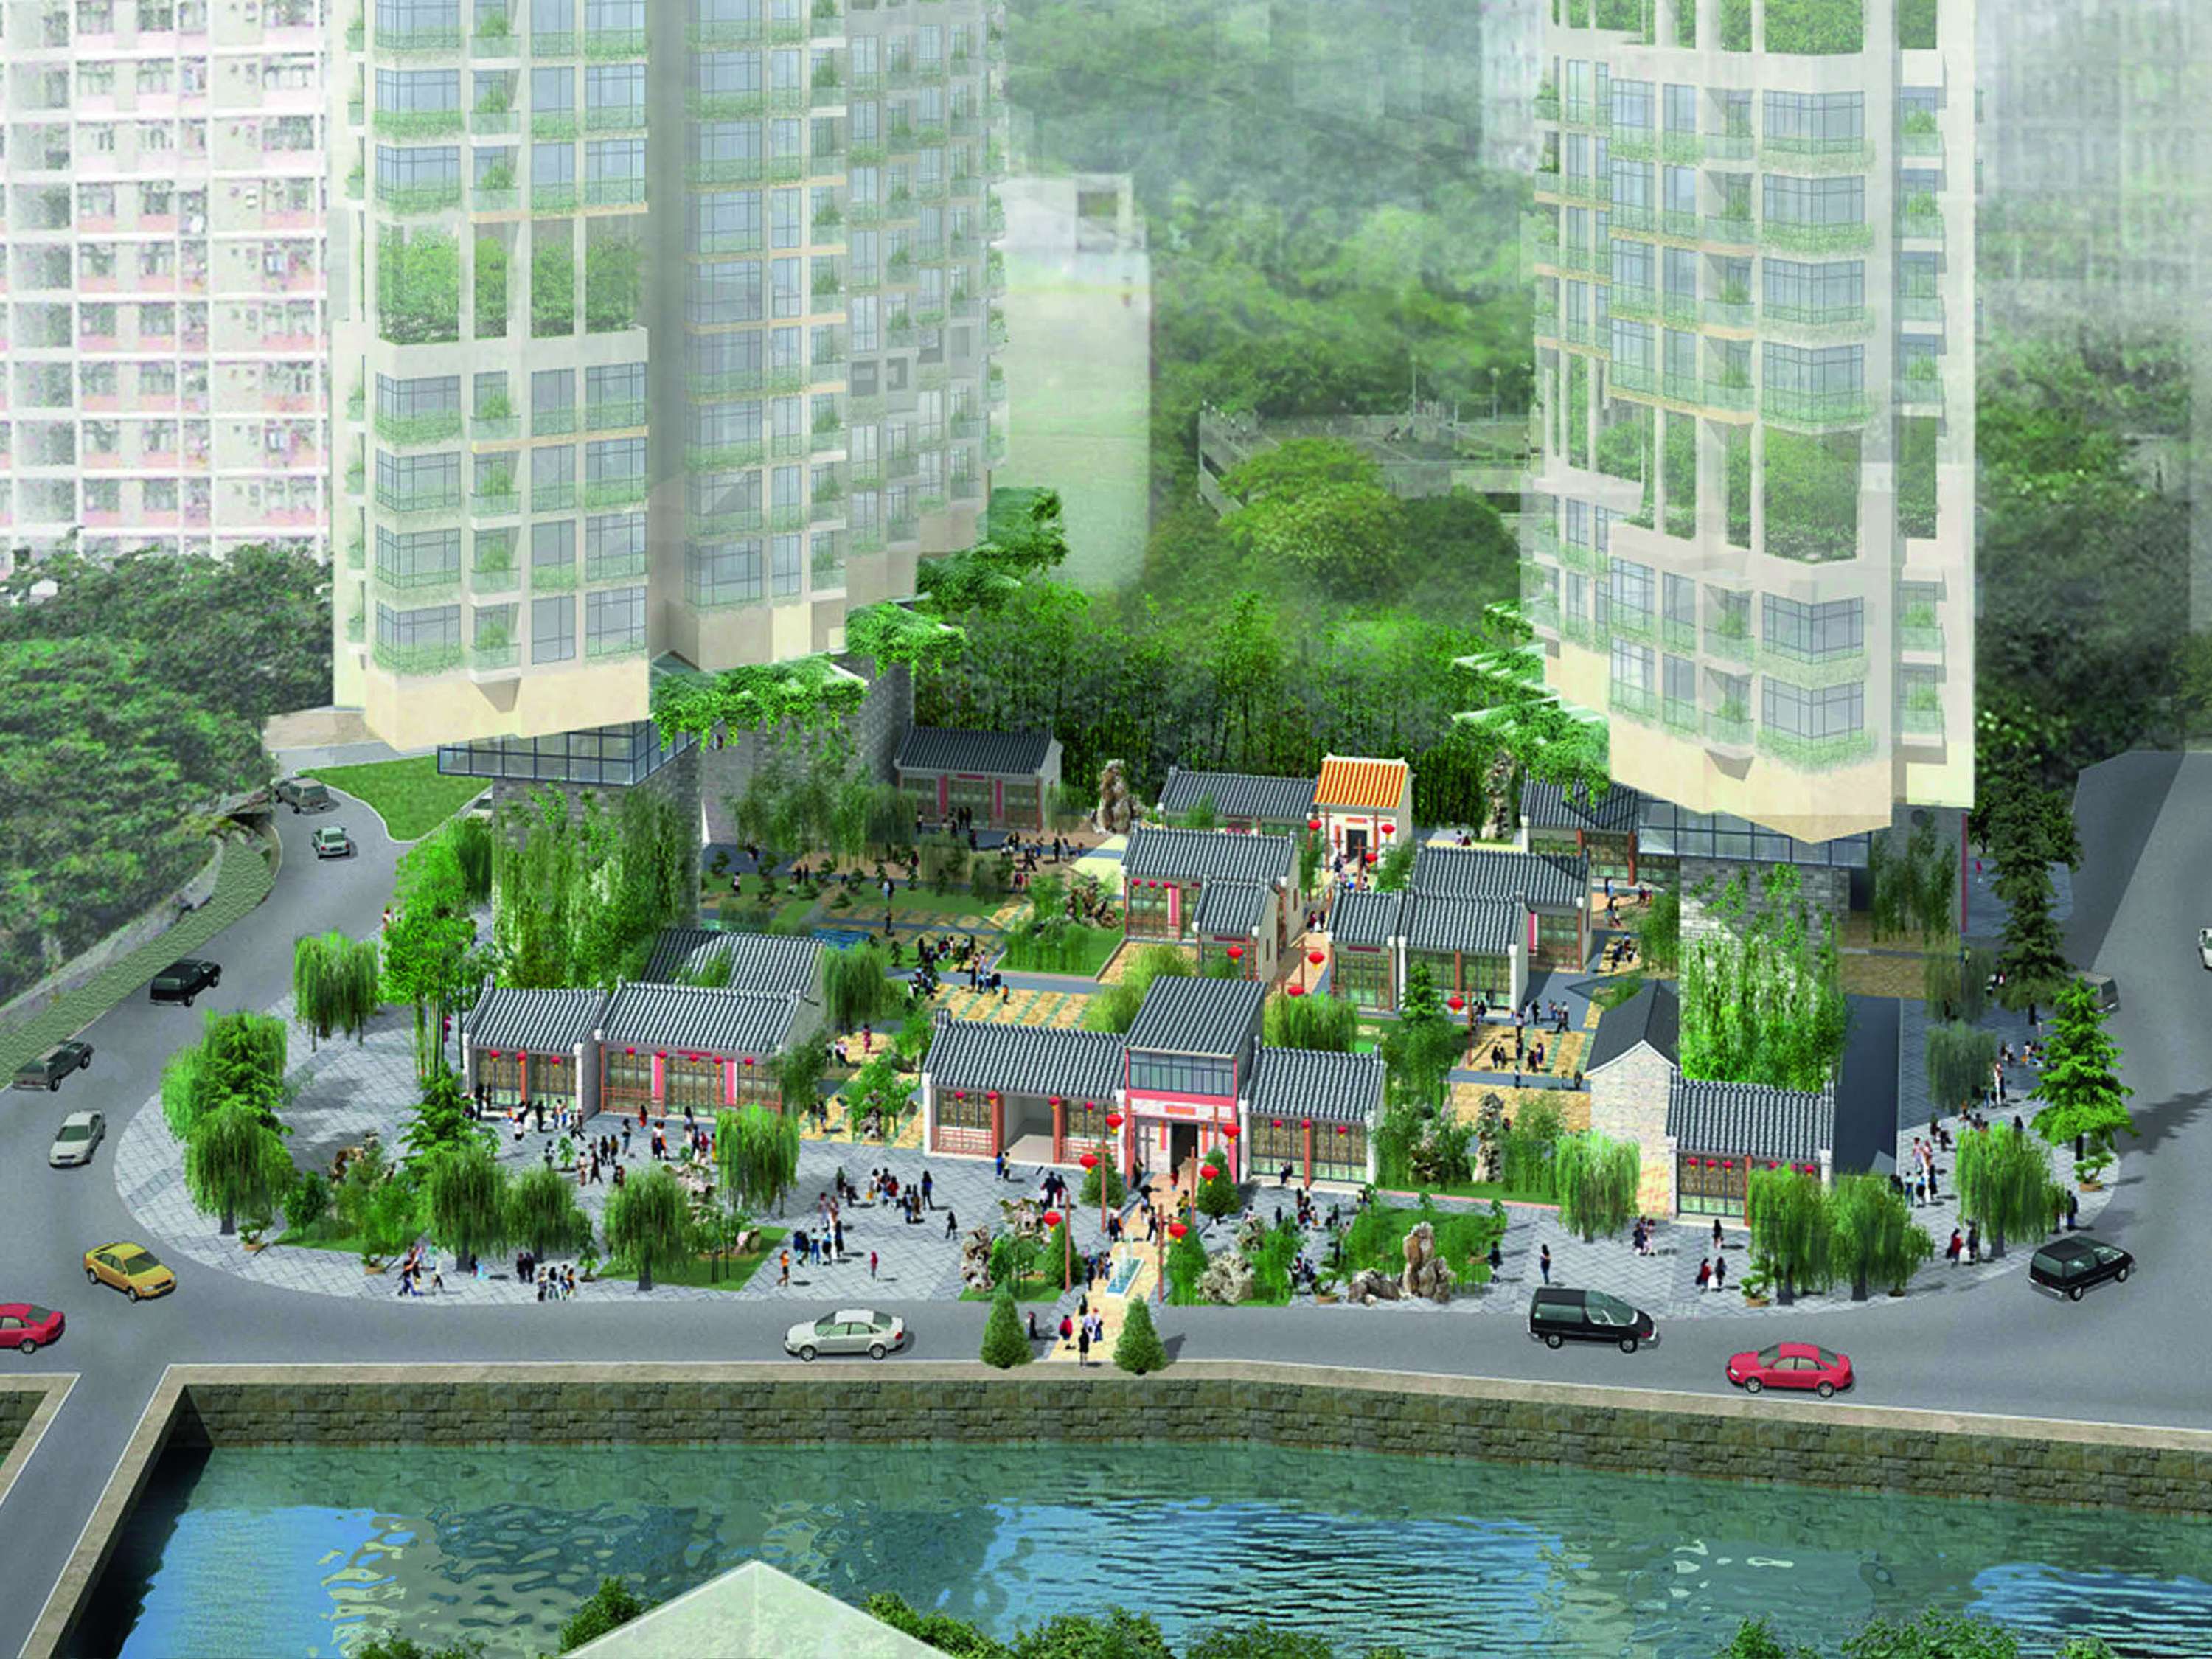 The proposed Nga Tsin Wai Village Conservation Park in Kowloon City features a blend of the traditional with the new. Photo: Handout